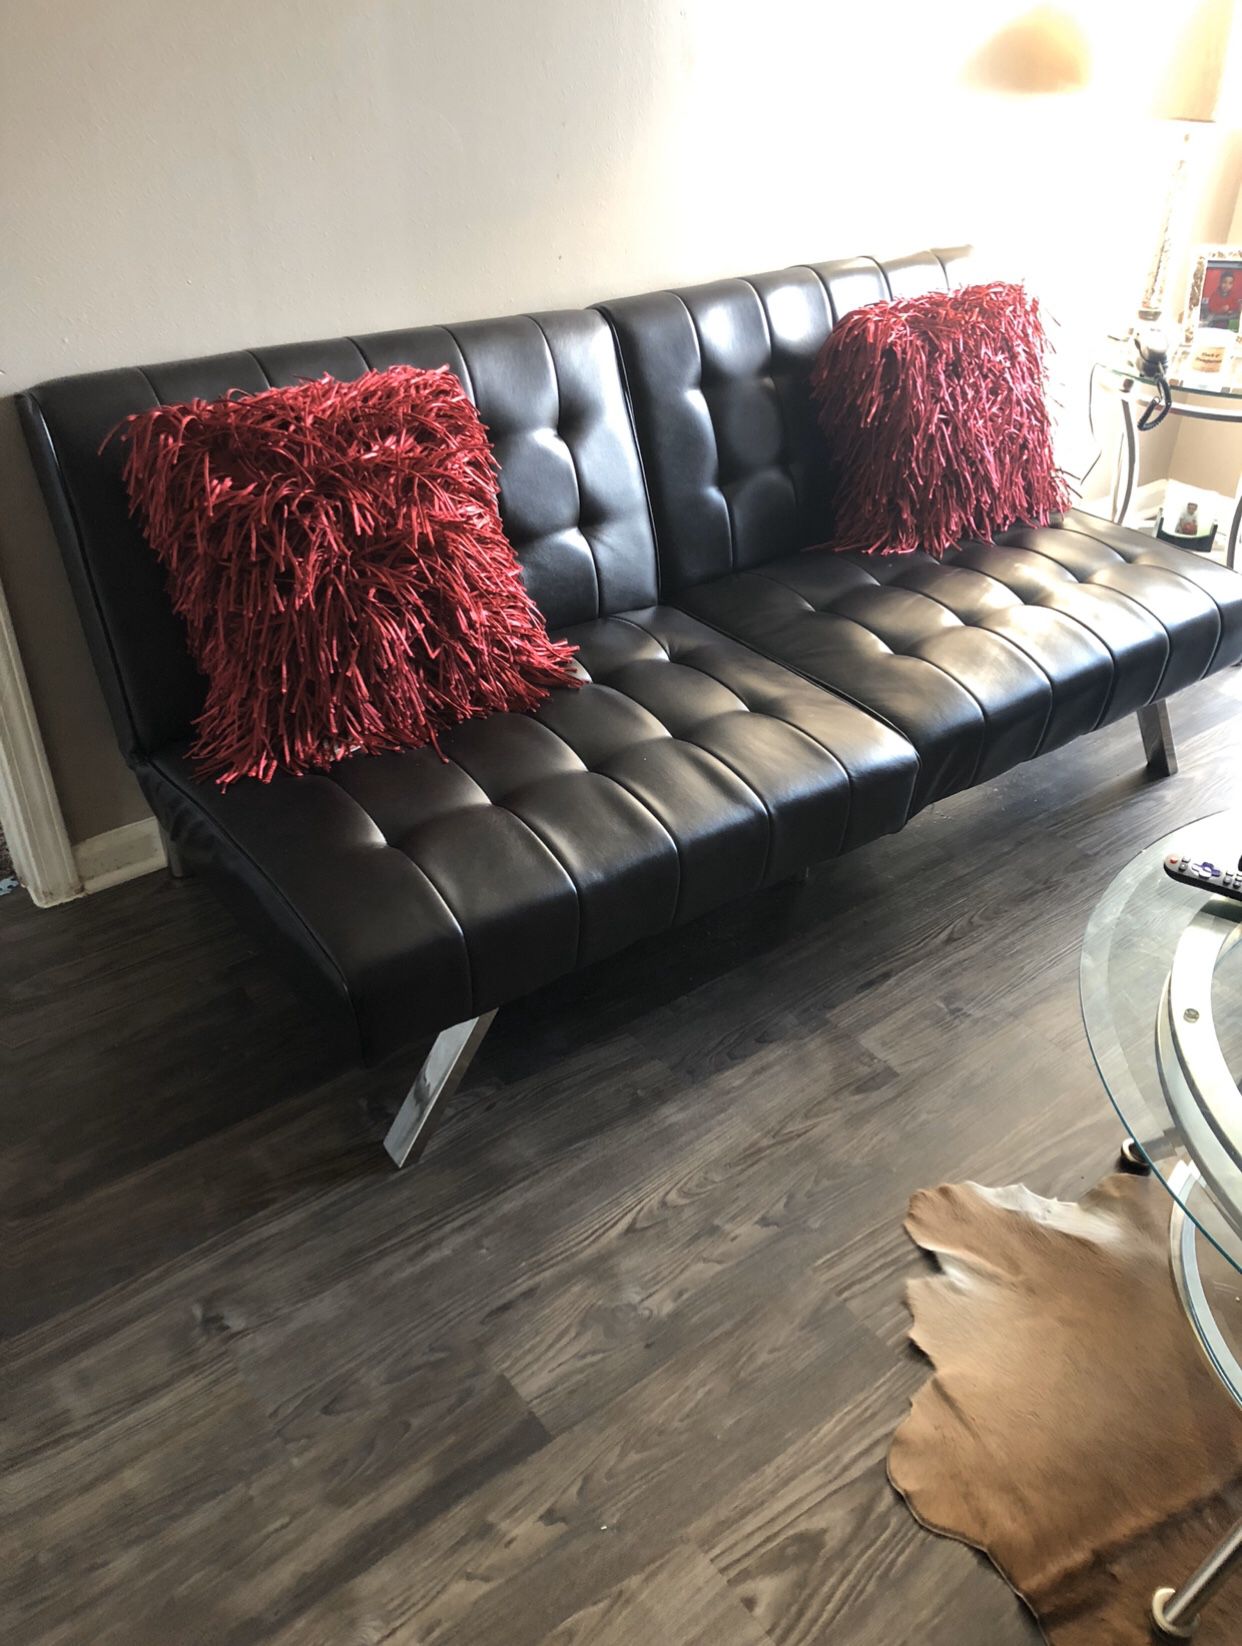 Brown leather futon/couch and chair